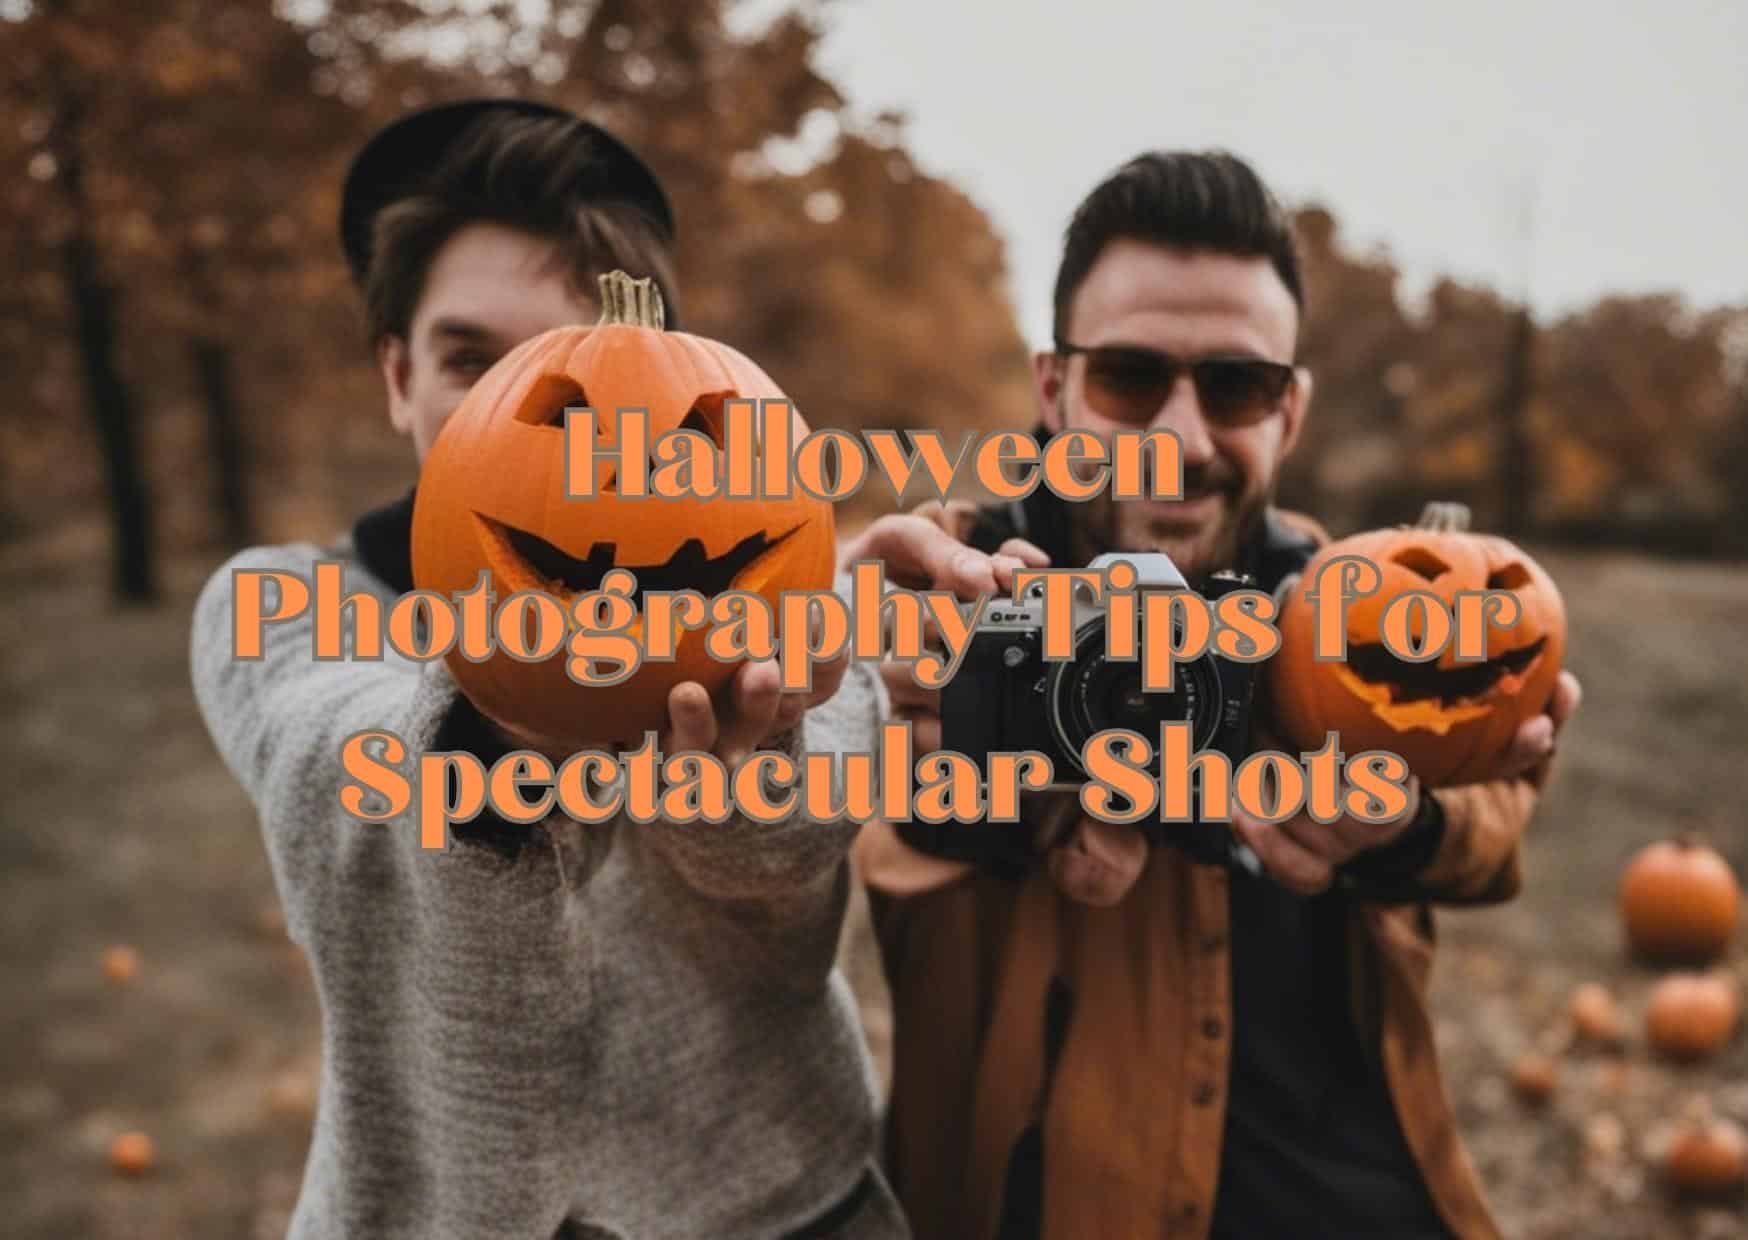 Halloween Photography Tips For Spectacular Shots